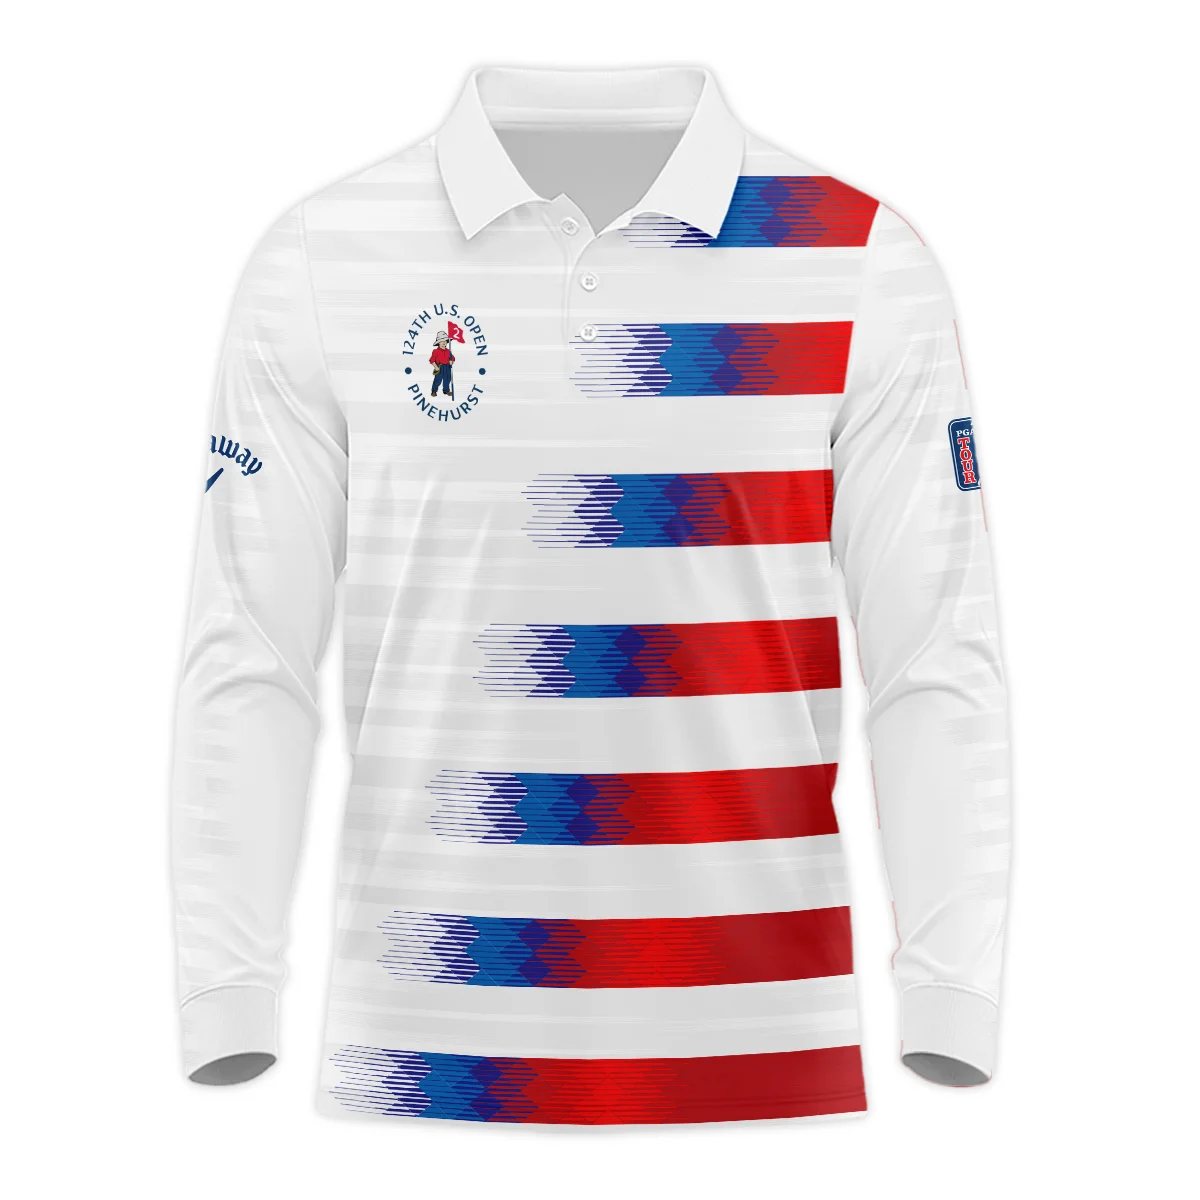 Callaway 124th U.S. Open Pinehurst Golf Sport Polo Shirt Blue Red White Abstract All Over Print Polo Shirt For Men